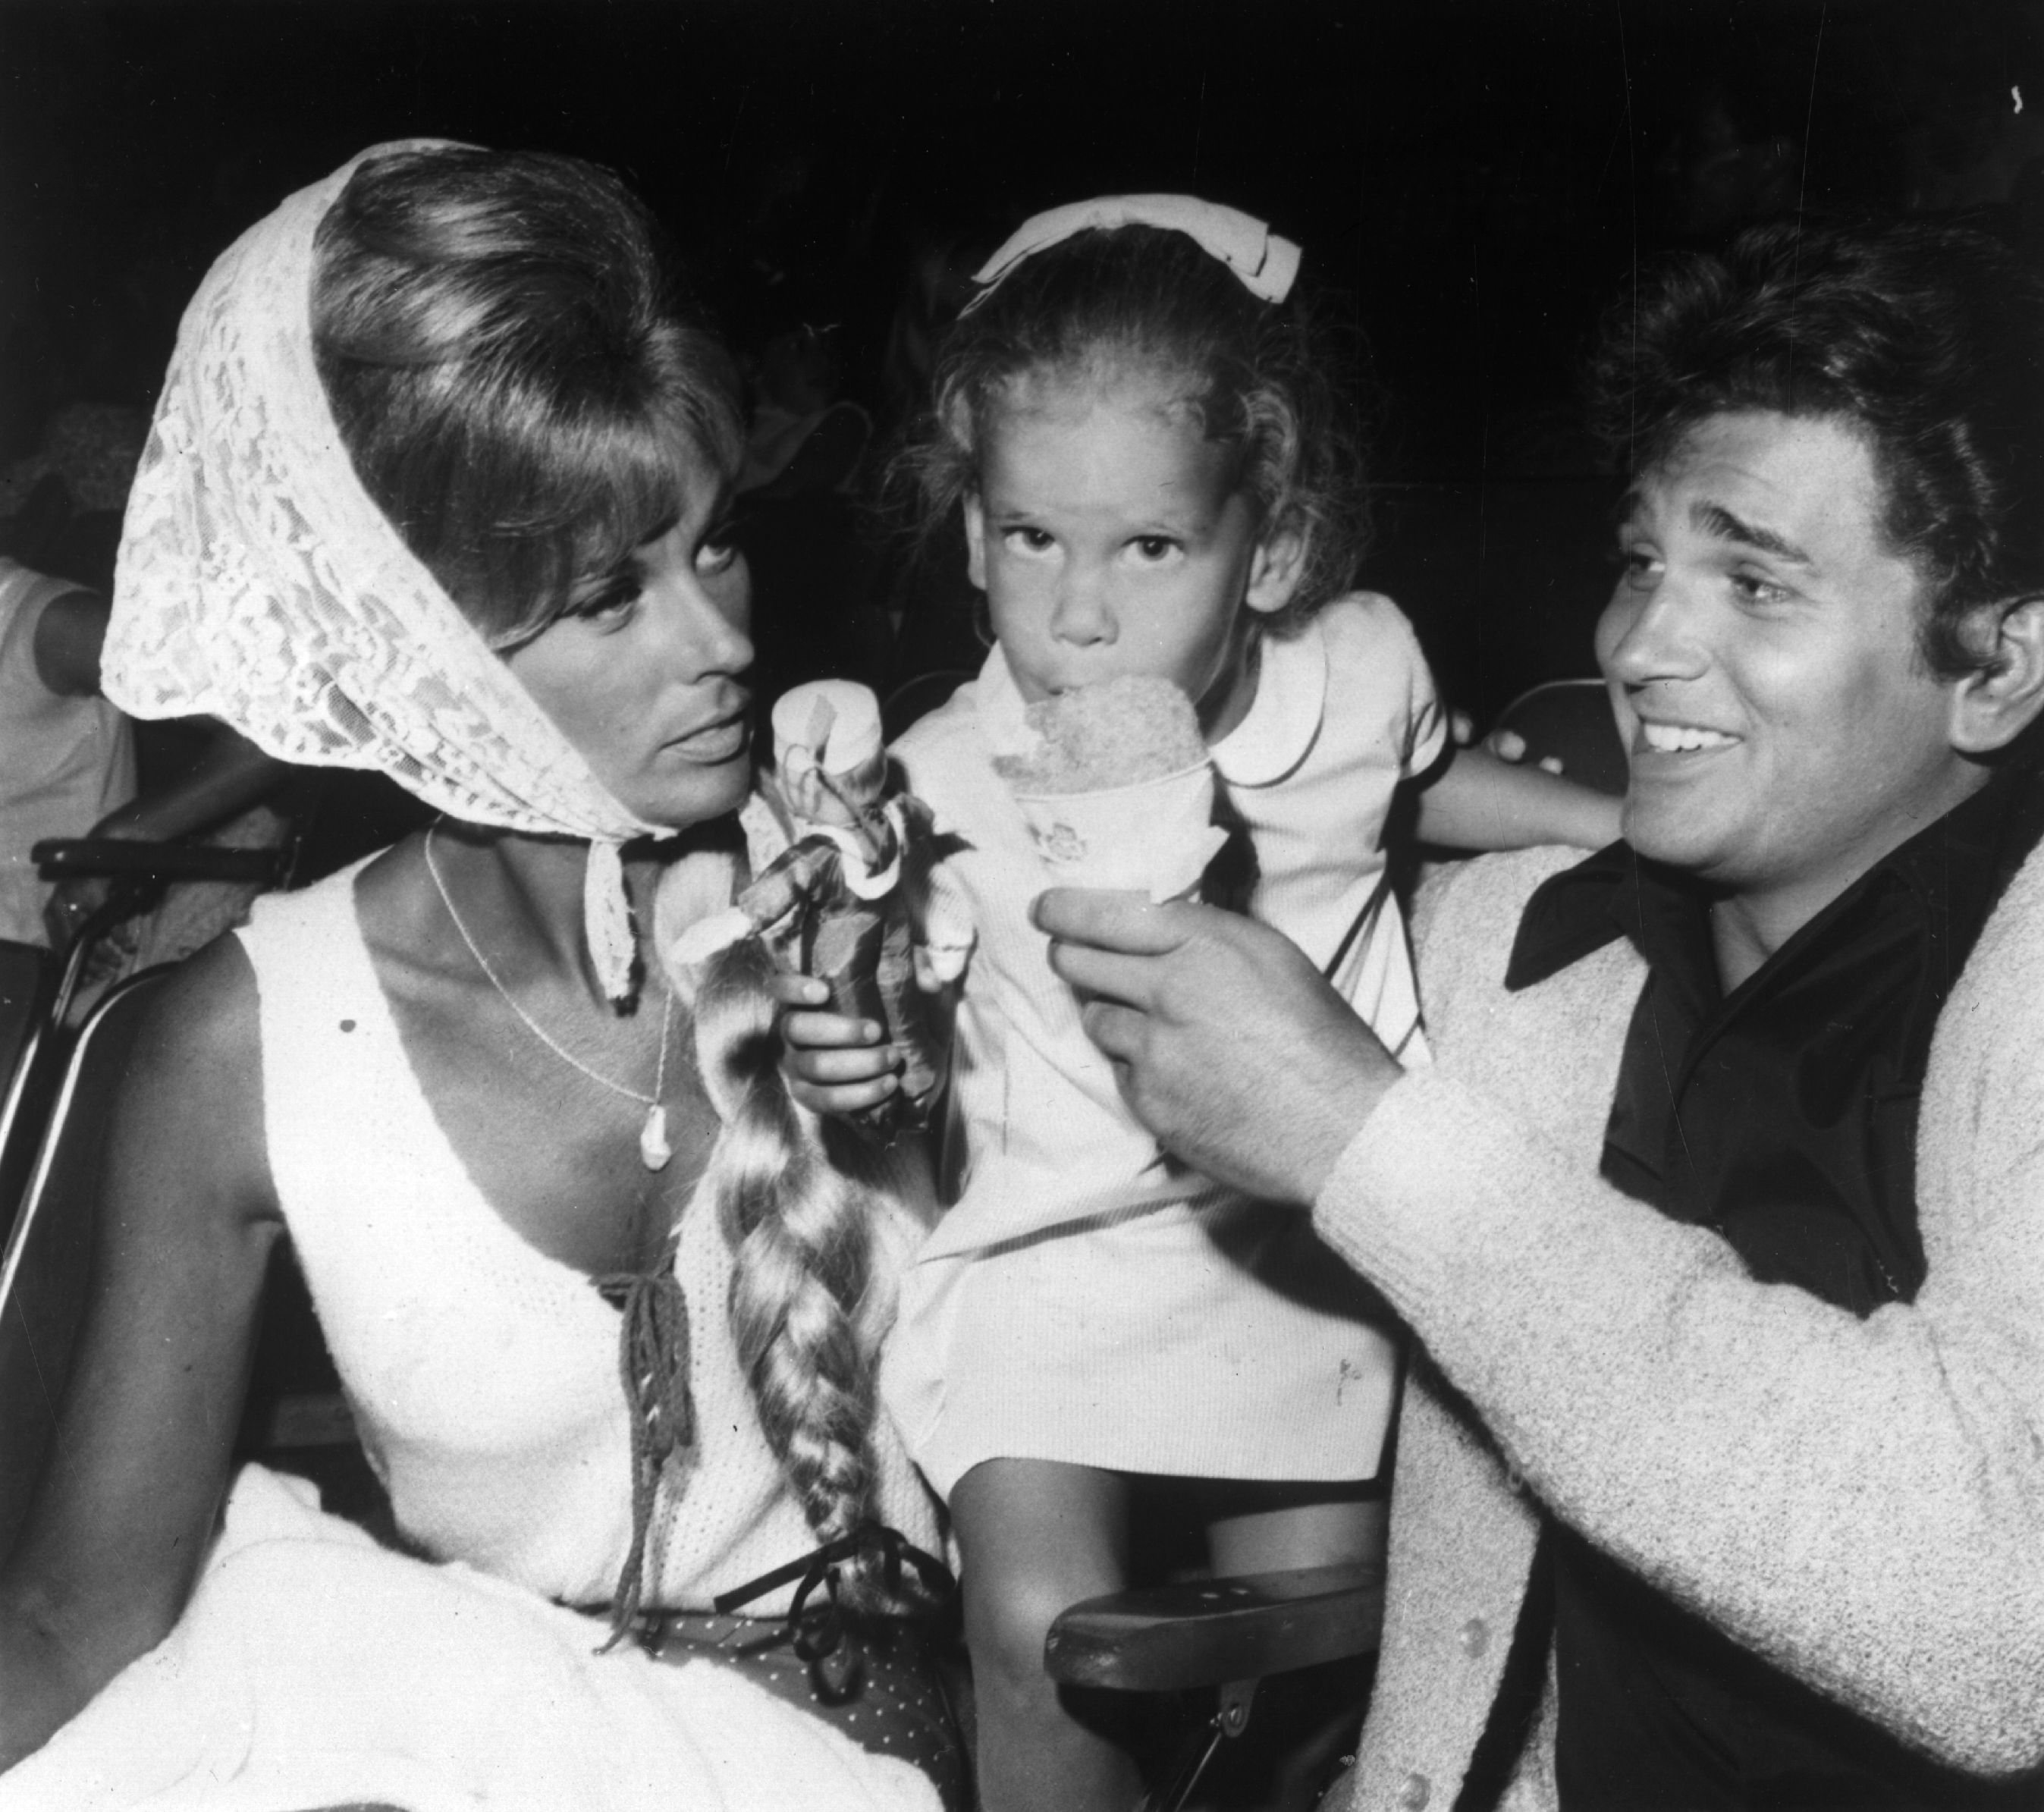 US actor, director and writer Michael Landon, who plays a leading role in the TV series 'Bonanza', with his wife Lynn and their young daughter in August 1965. | Source: Getty Images.